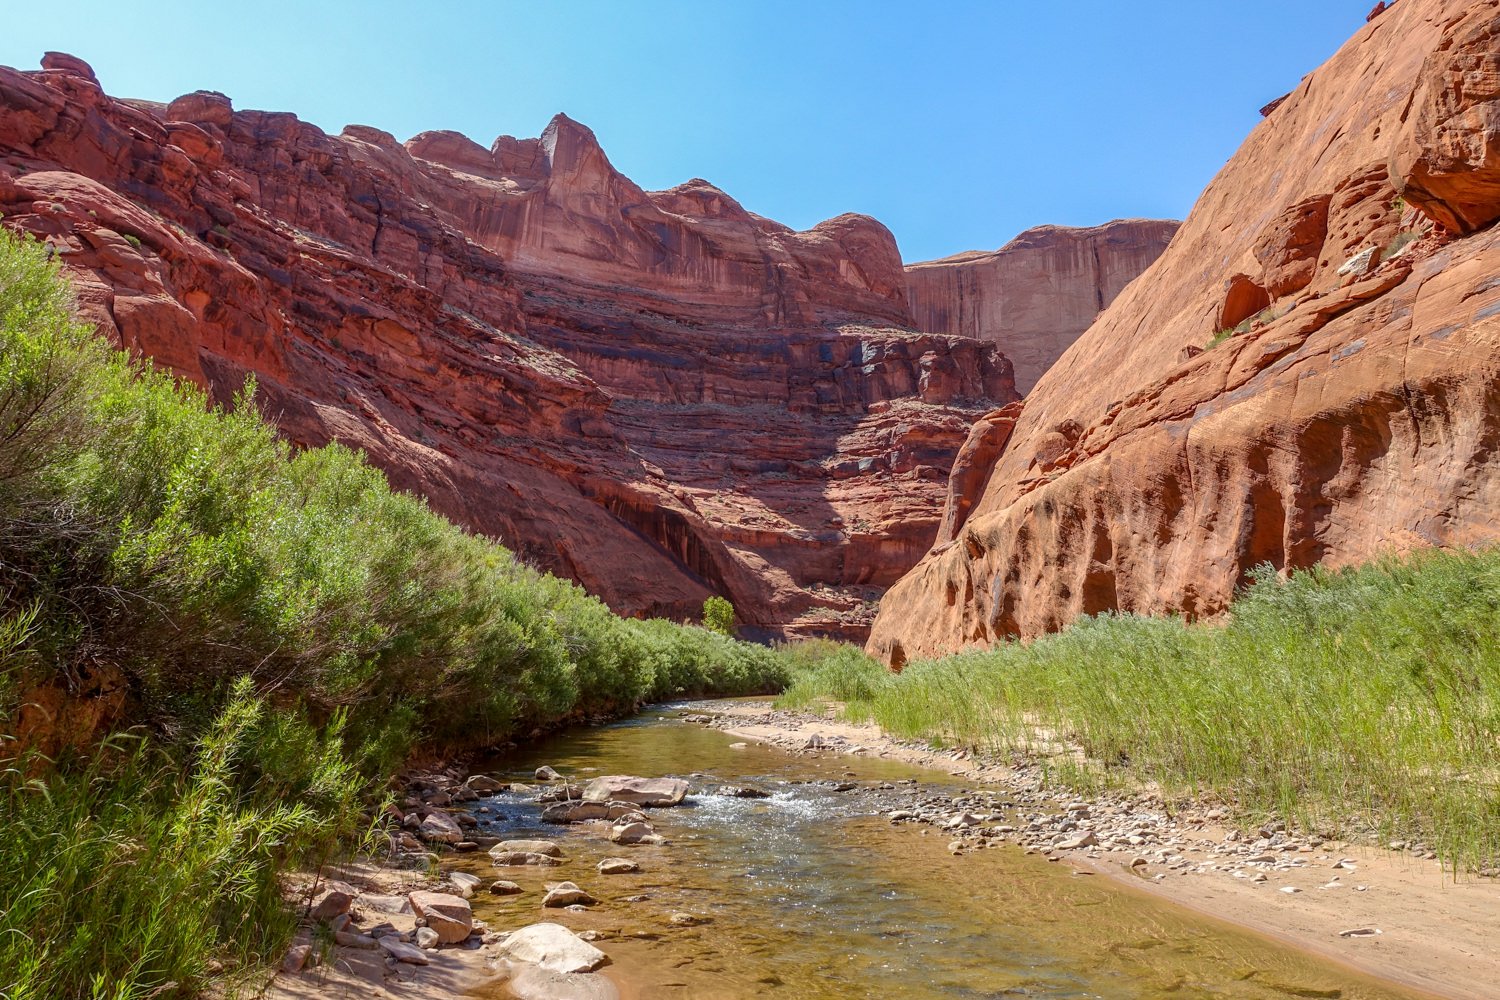 A red Canyon along the Coyote Gulch backpacking route